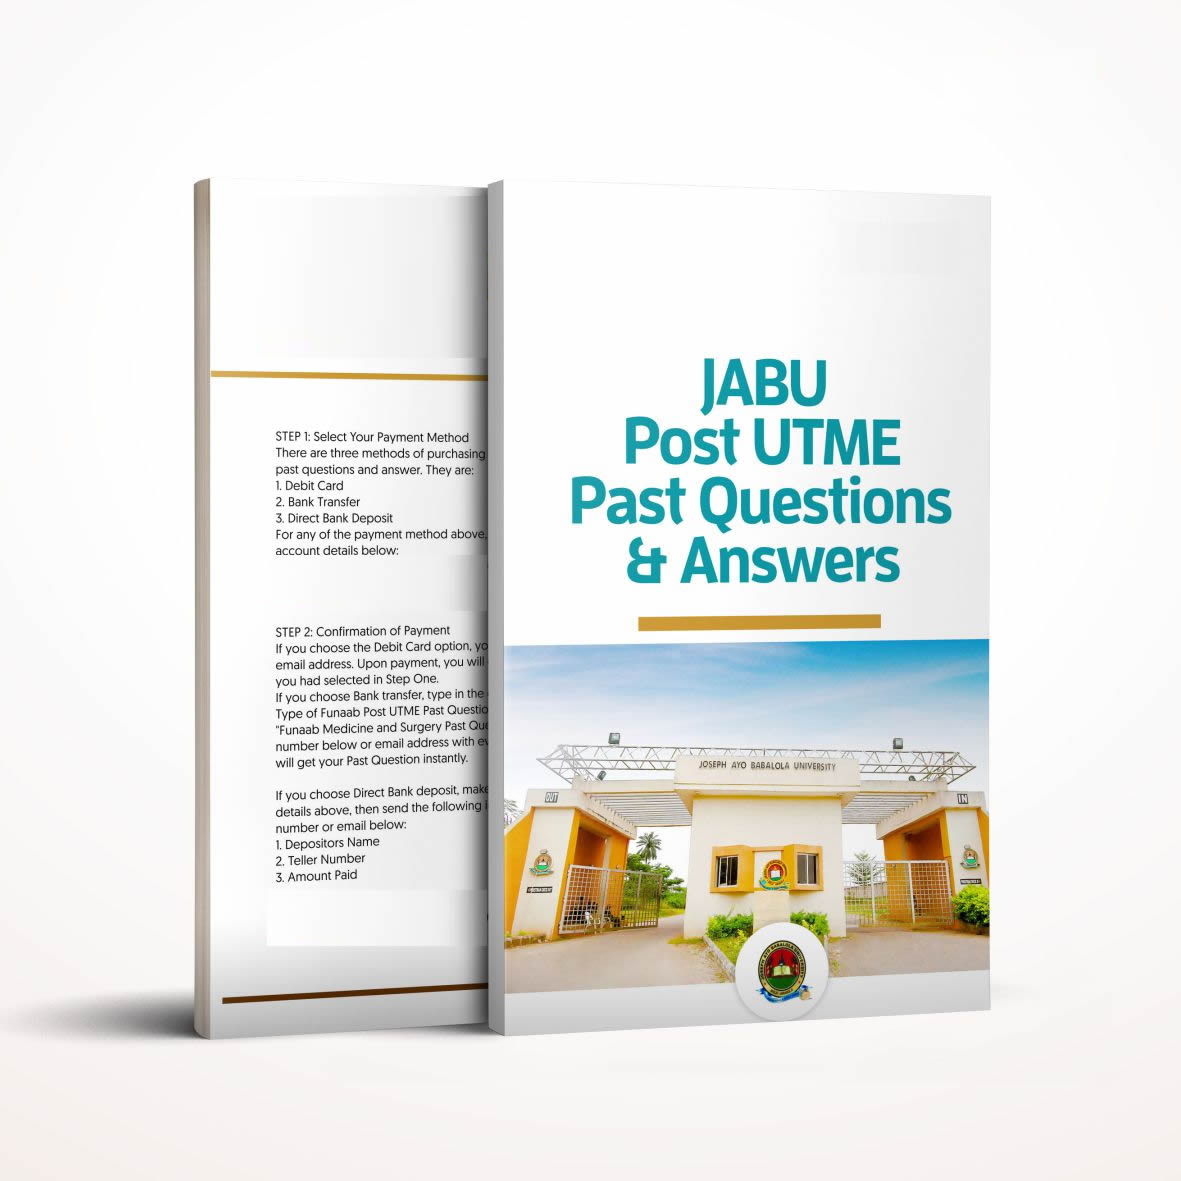 JABU Post UTME past questions and answers